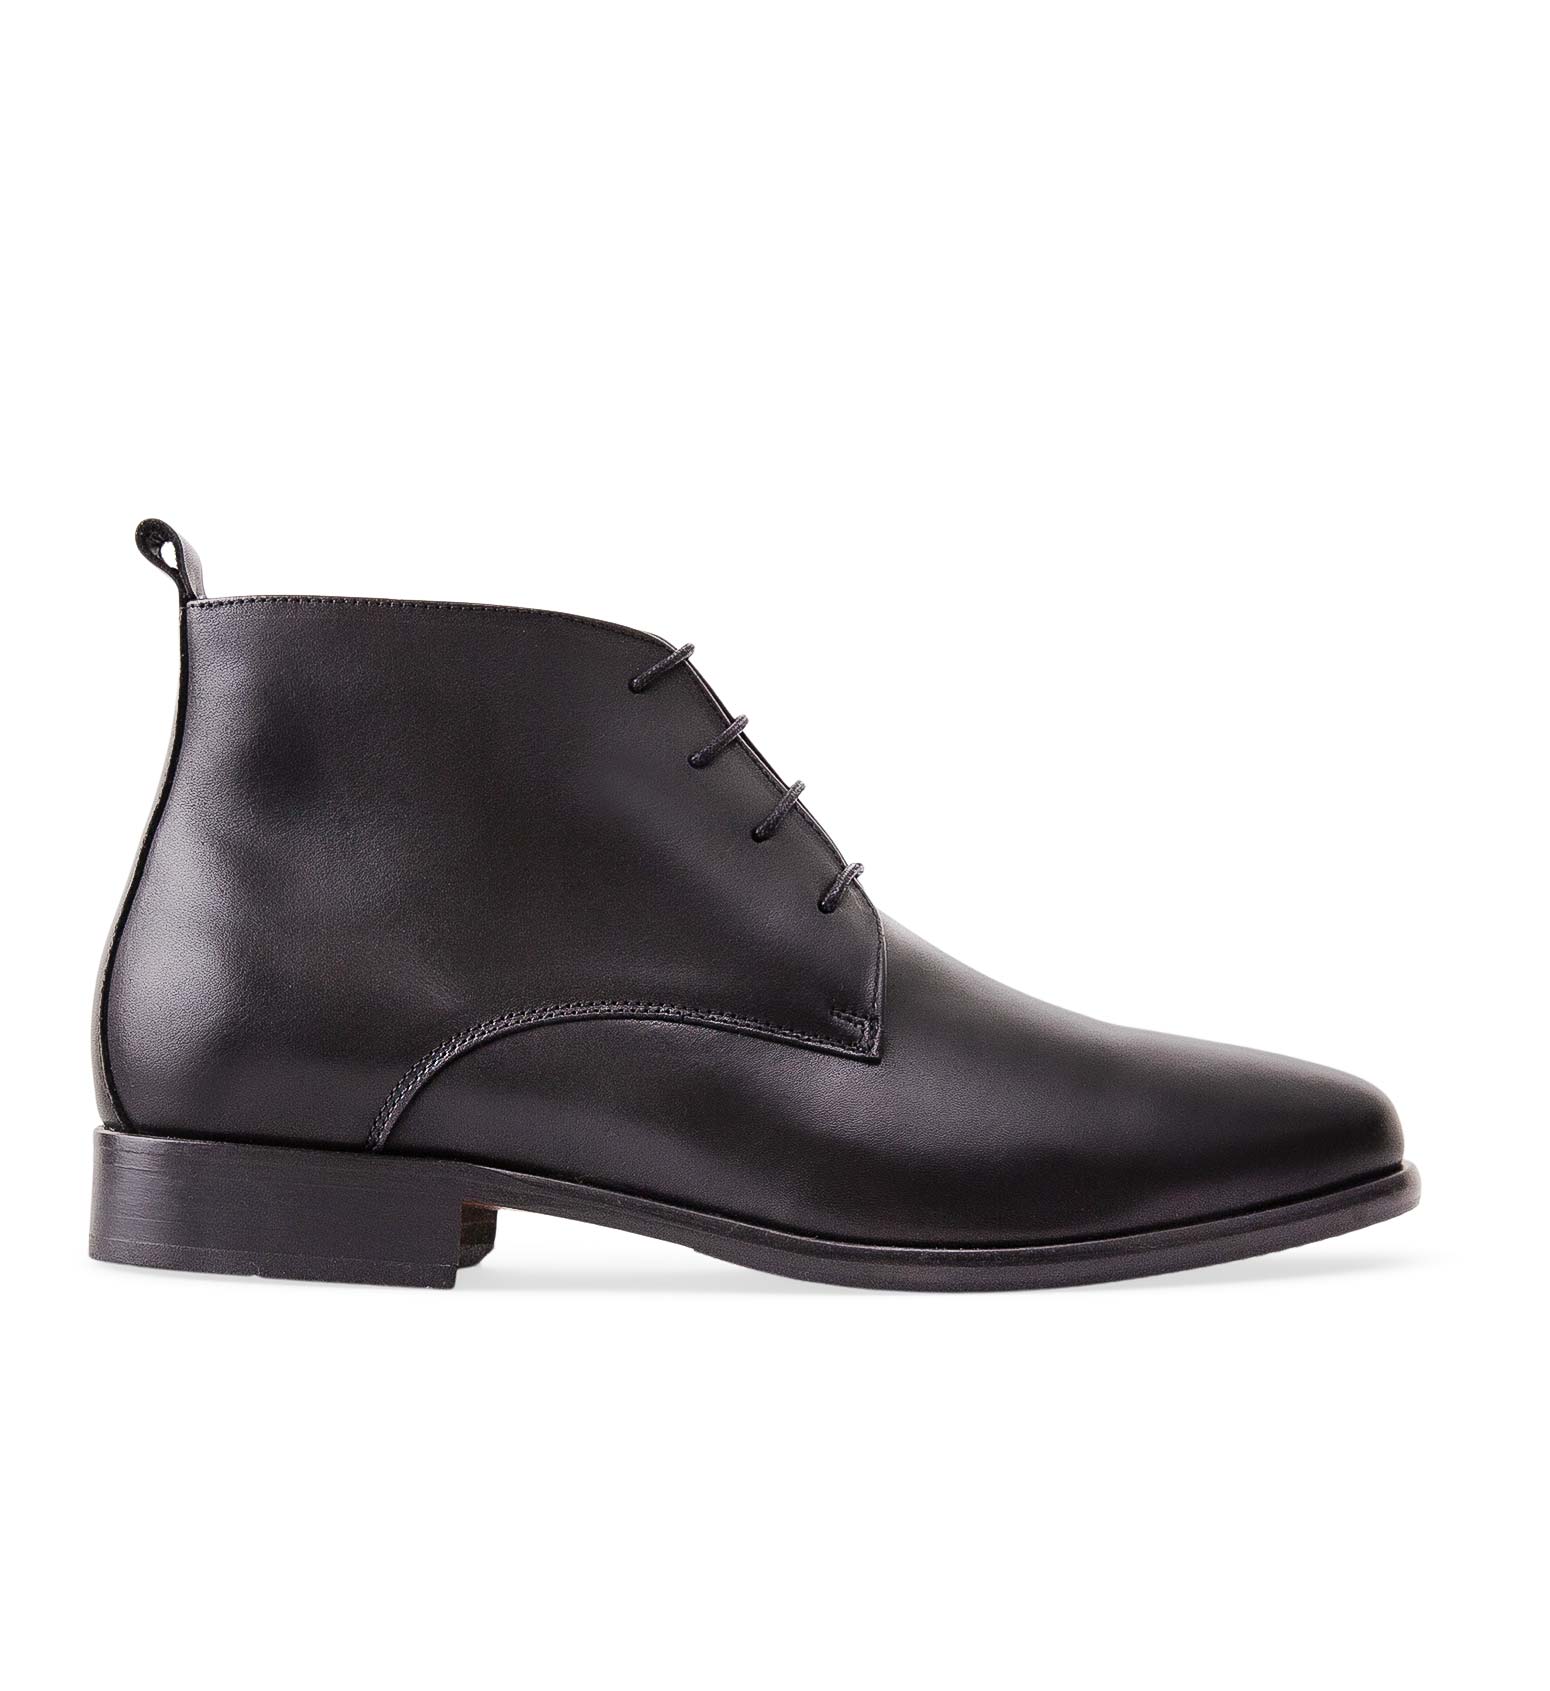 Dubnium Black Leather Boots | Bared Footwear